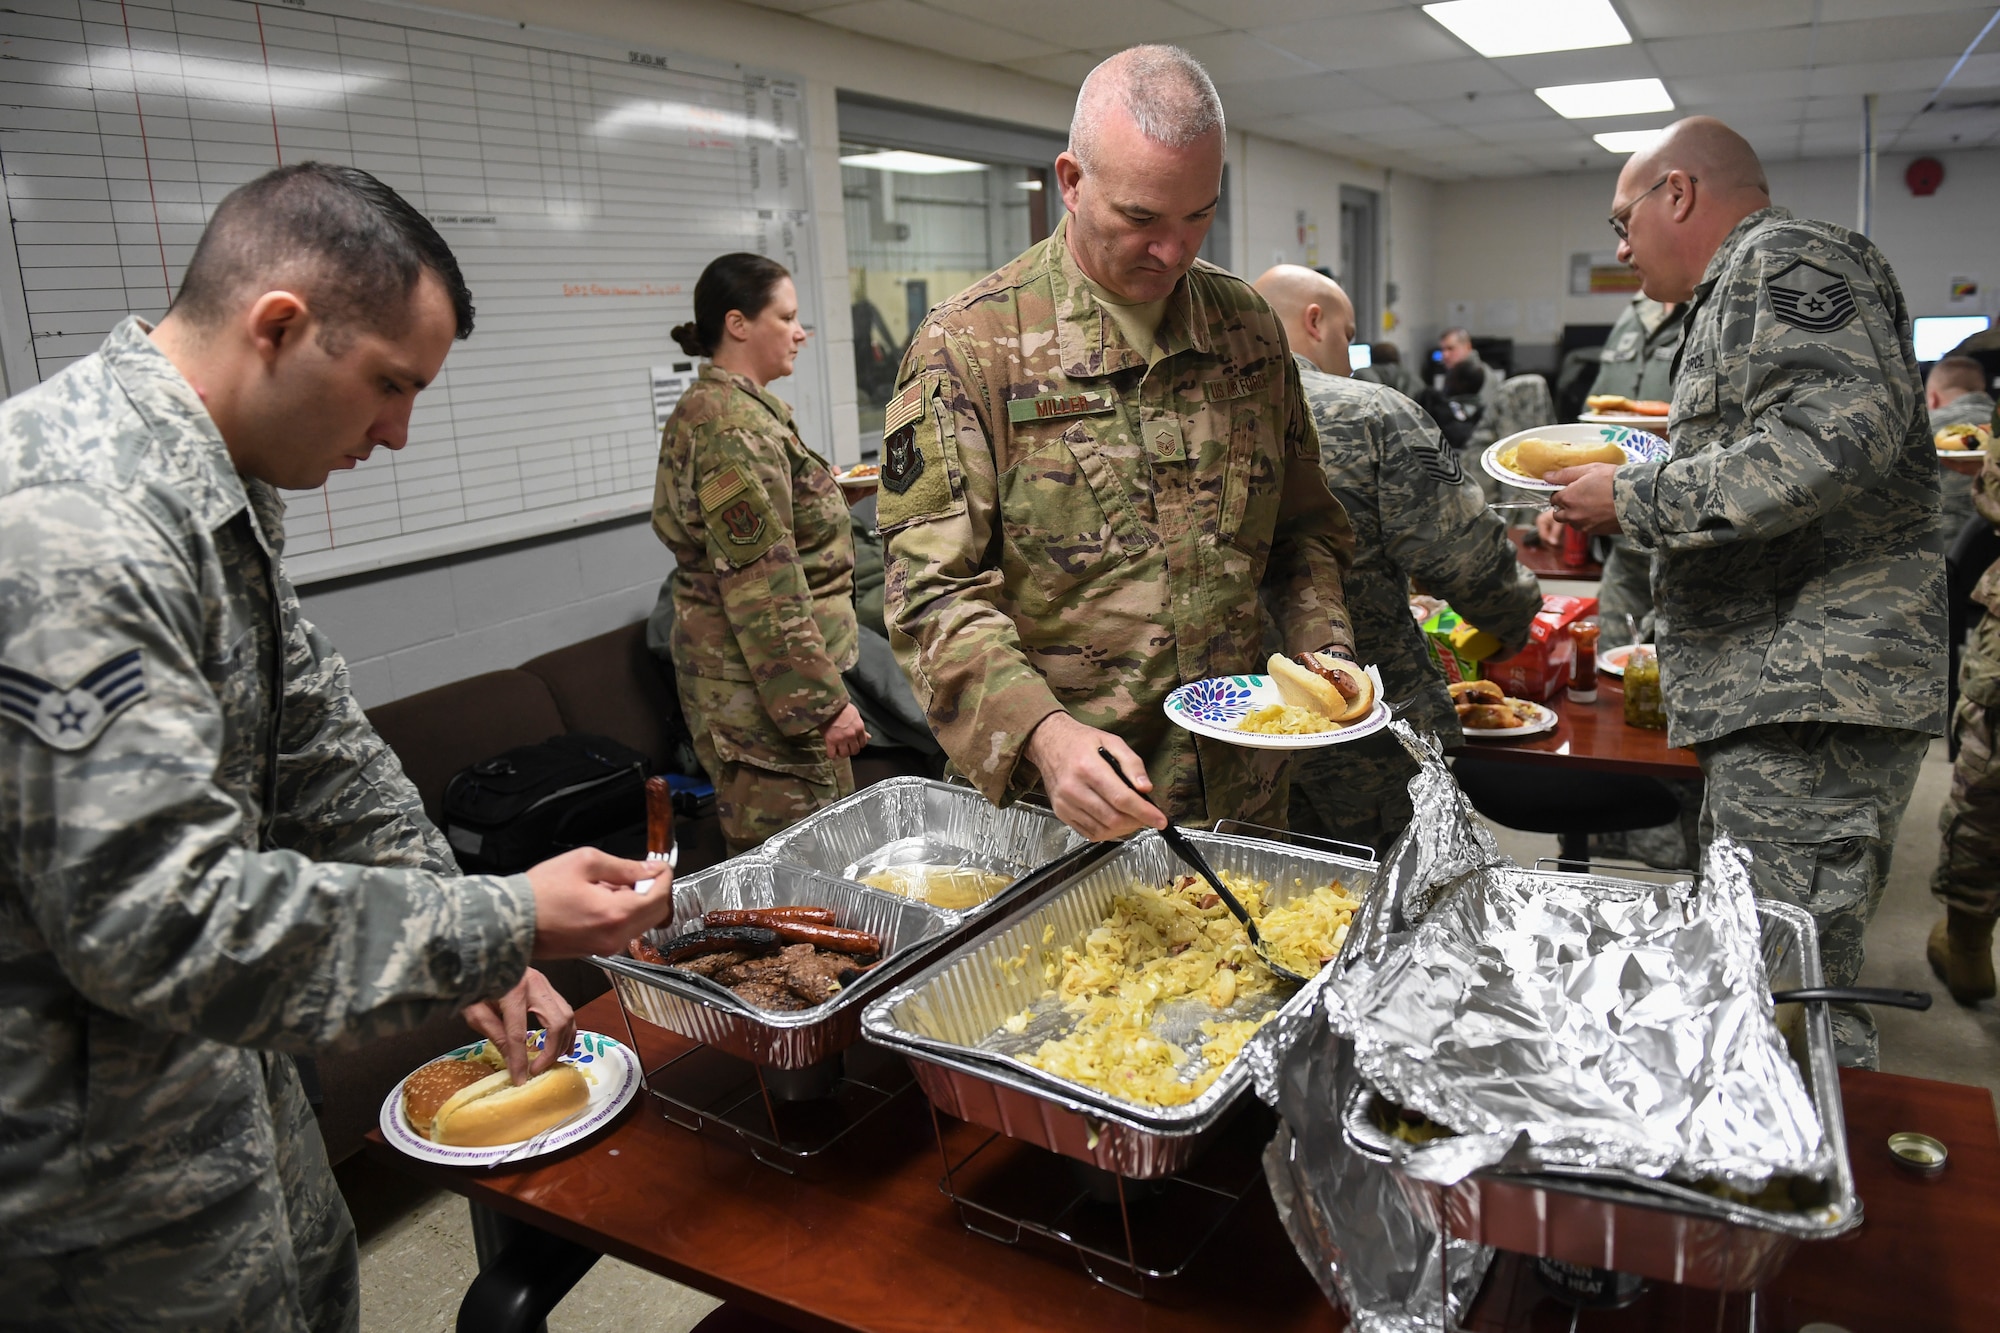 Members of the 911th Maintenance Group help themselves to a home-cooked meal prepared by members of the 911th Airlift Wing Safety Office at Wright-Patterson Air Force Base, Ohio, Feb. 5, 2019. The meal was prepared on behalf of the group leadership and the Key Spouse Organization in appreciation of the tireless dedication the members have shown while being away from loved ones while they work away from home. (U.S. Air Force photo by Joshua J. Seybert)